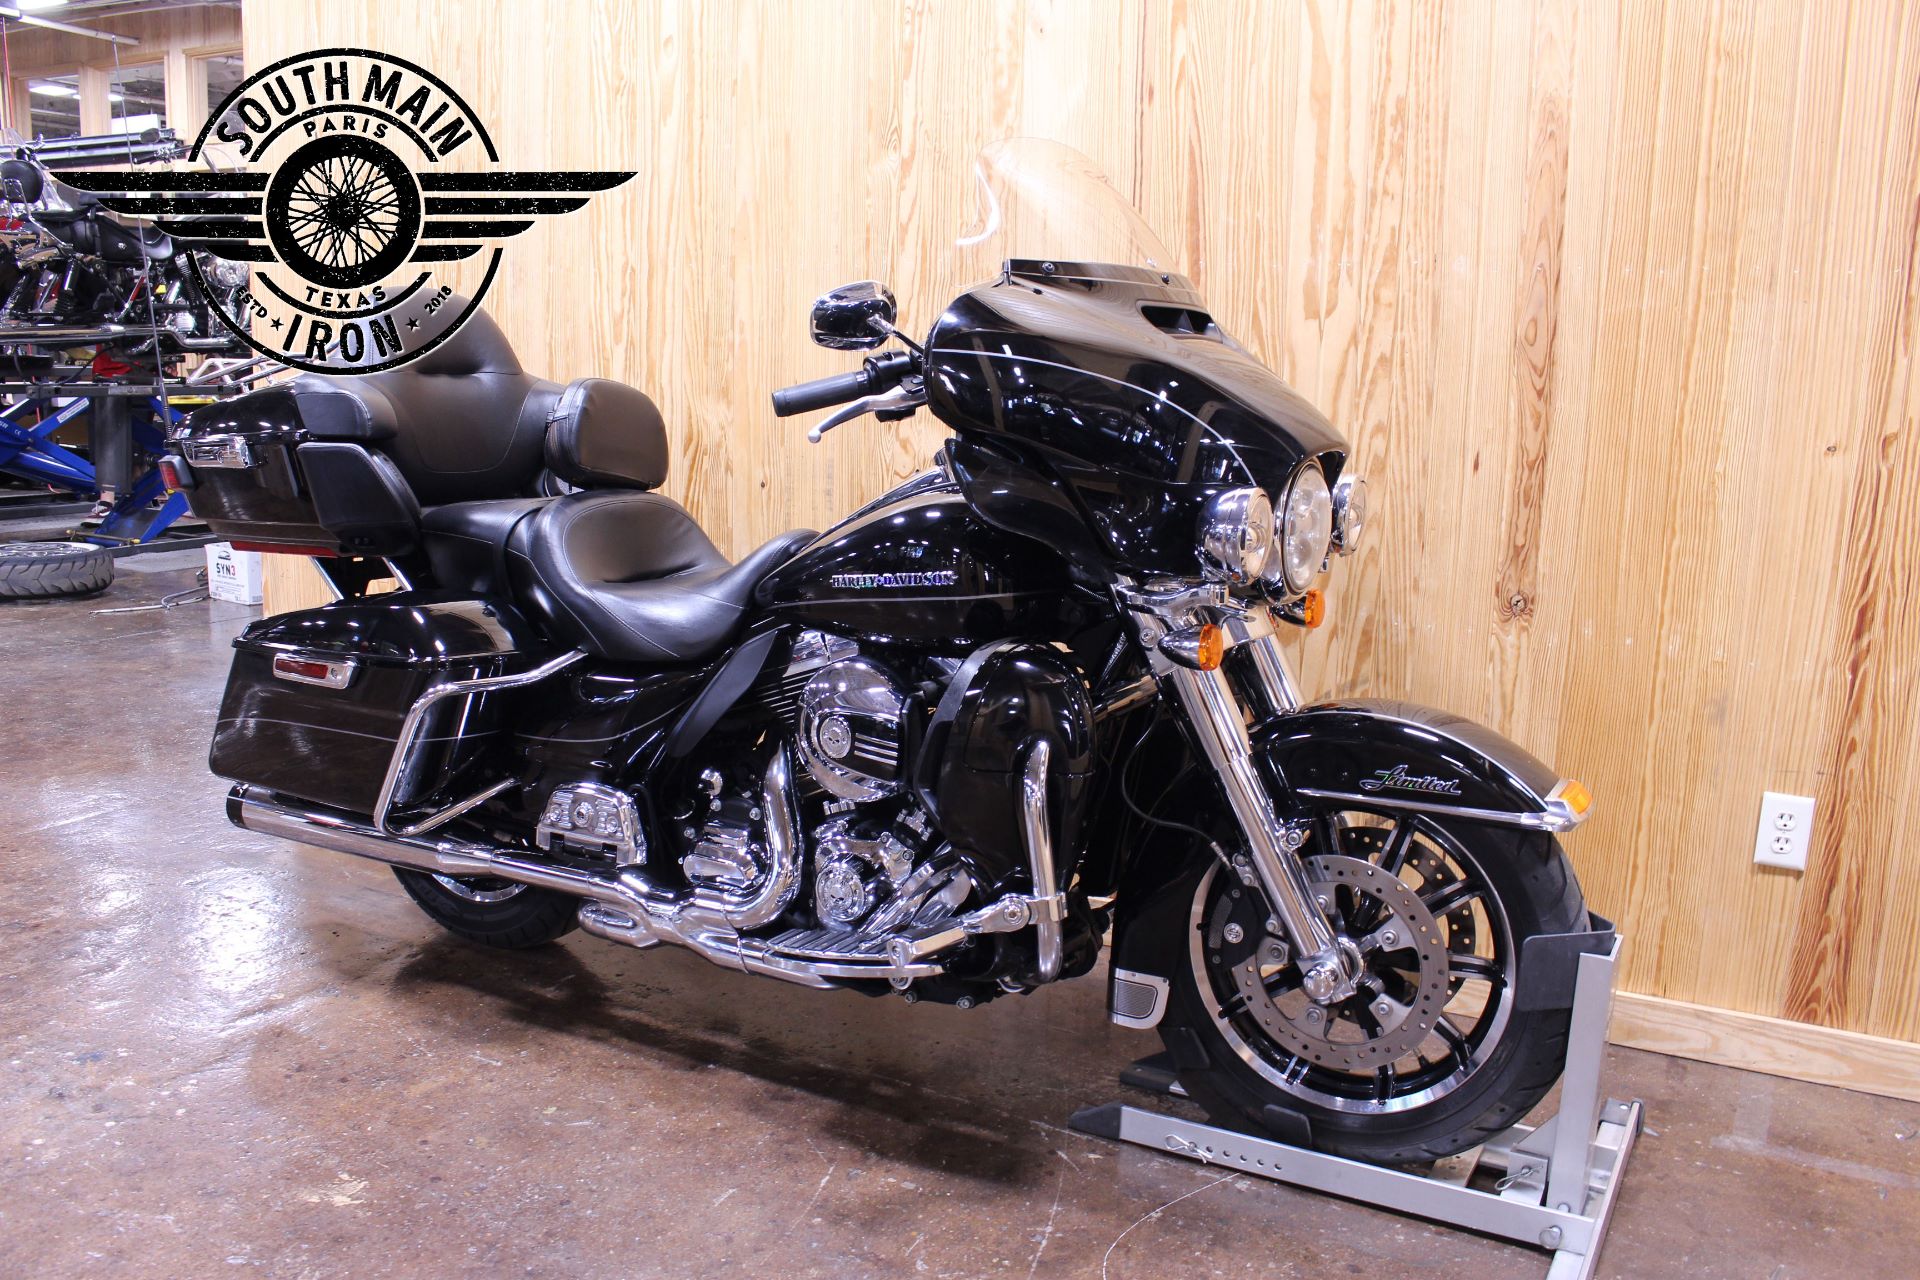 2014 Harley-Davidson Ultra Limited in Paris, Texas - Photo 4